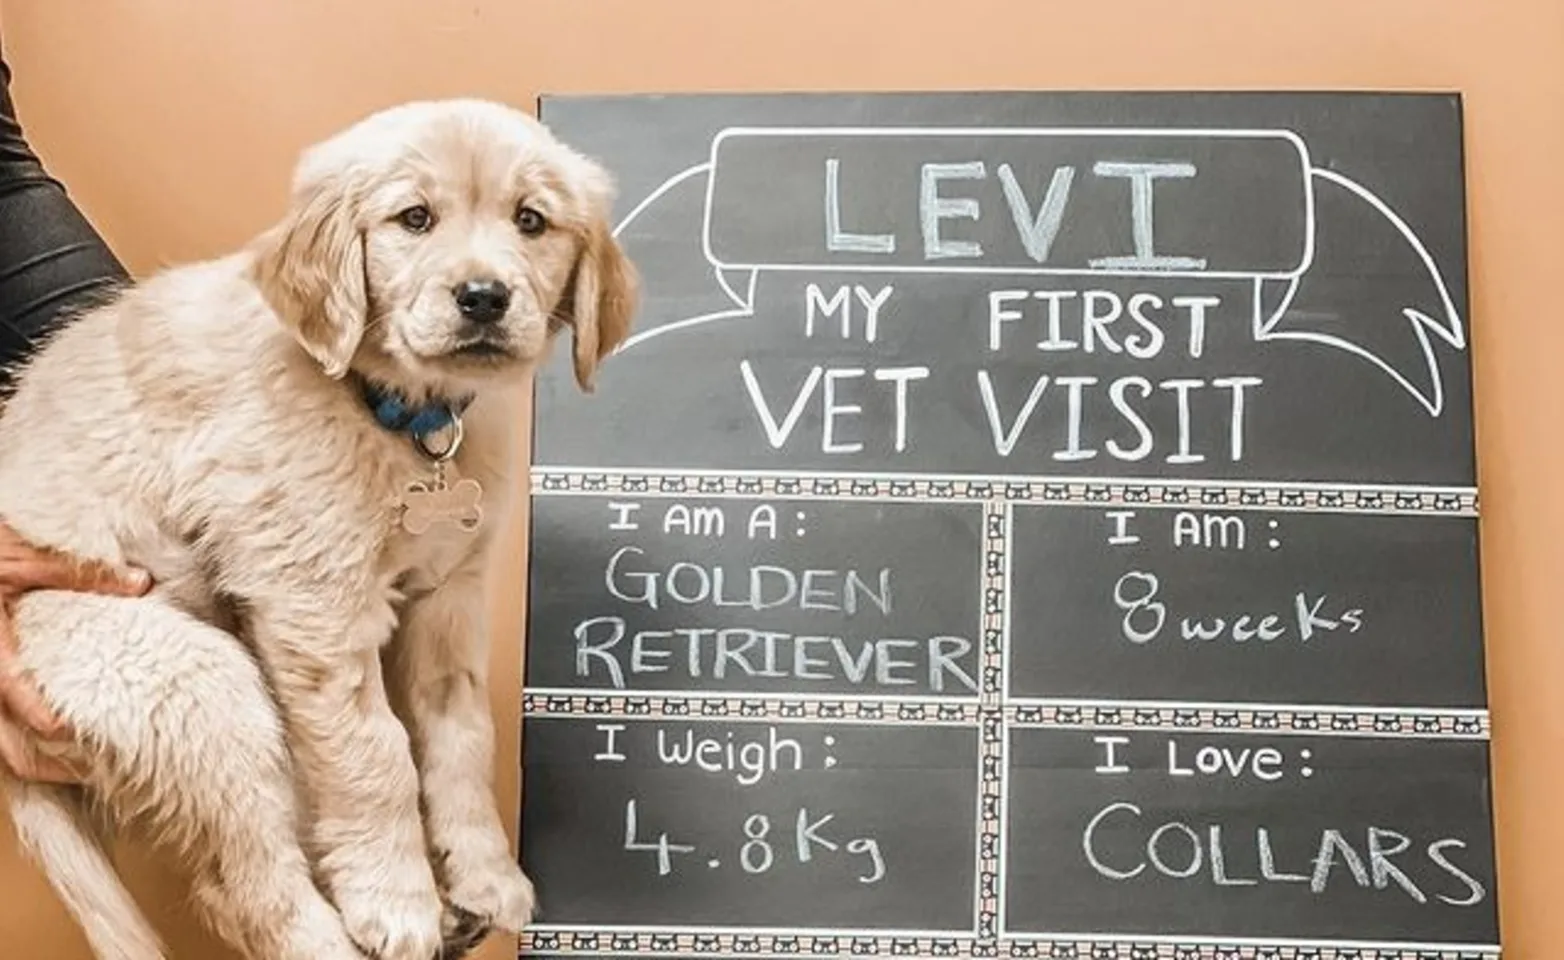 Dog being held up next to a chalkboard sign 